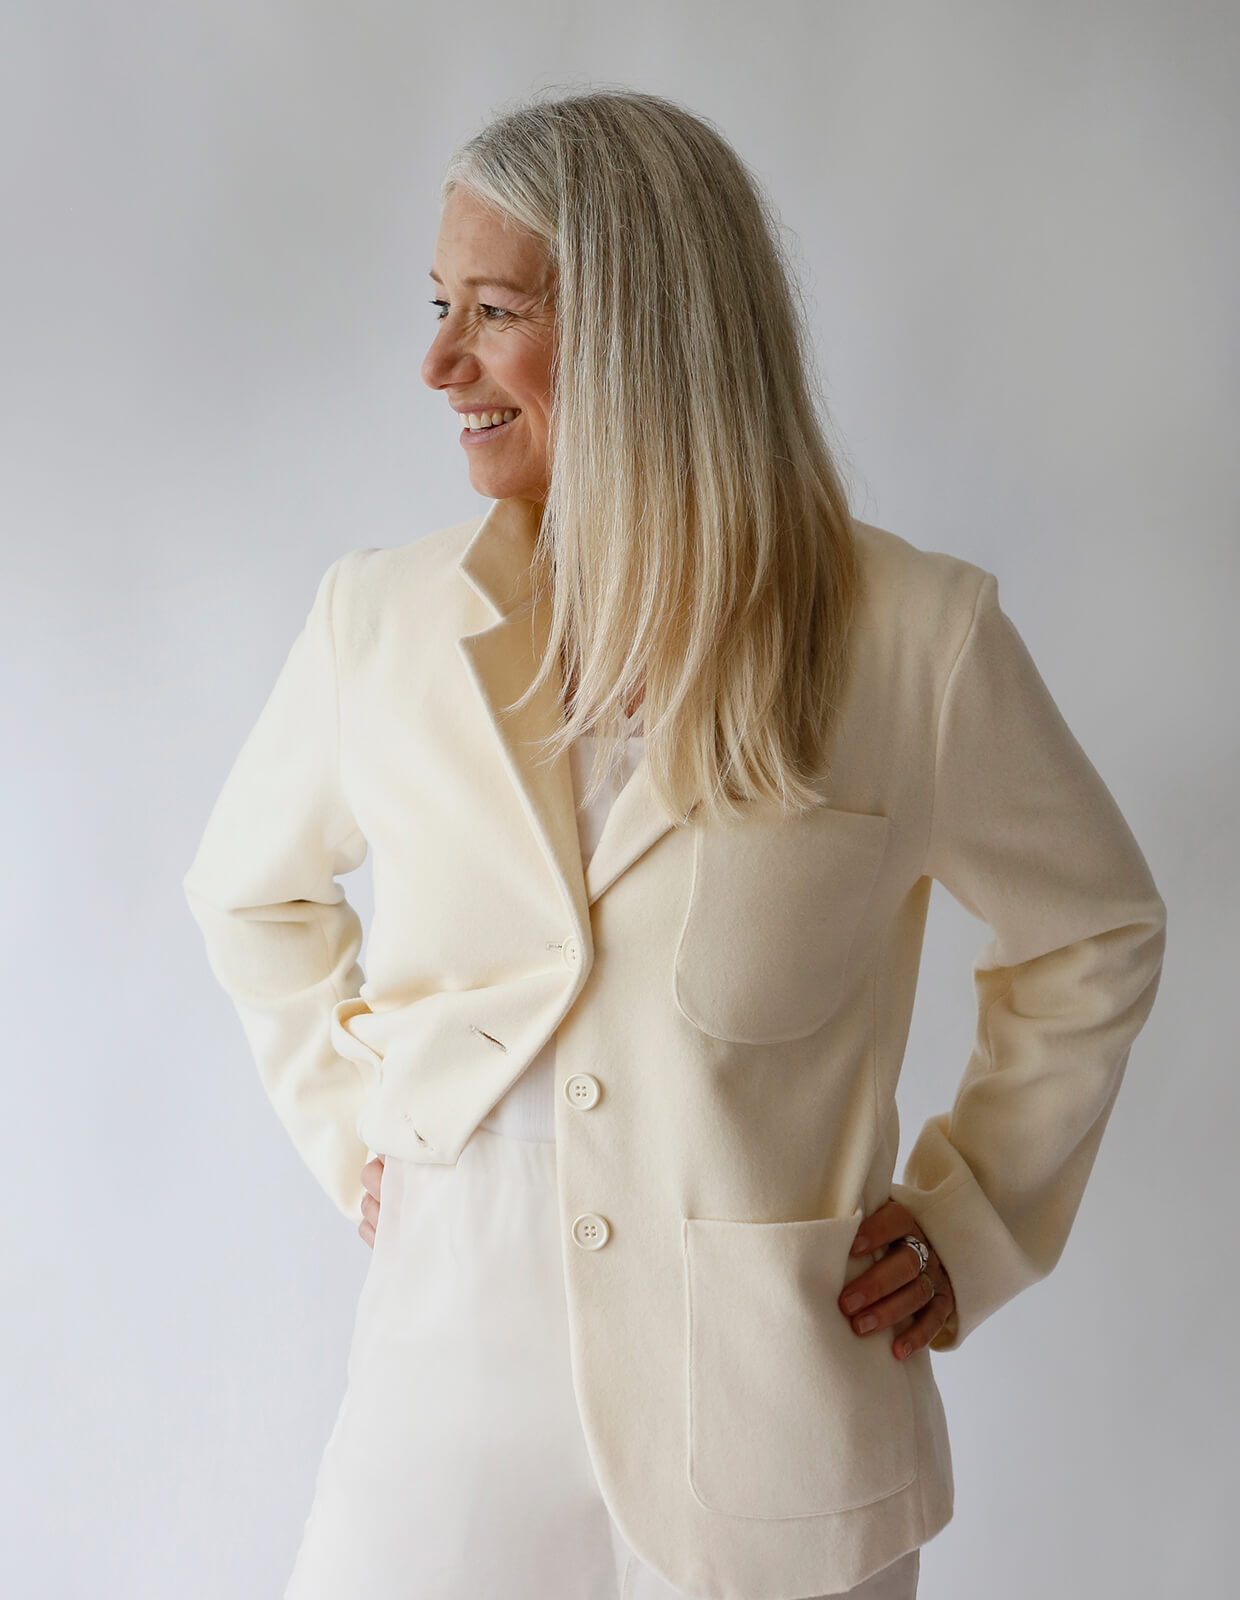 Woman wearing Blazer sewing pattern from The Maker's Atelier on The Fold Line. A blazer pattern made in linen, denim, medium weight cottons and lightweight wool fabrics, featuring a classic men’s style with collar, stand, lapels, patch pockets, front button closure, over long sleeves and buttoned cuffs.